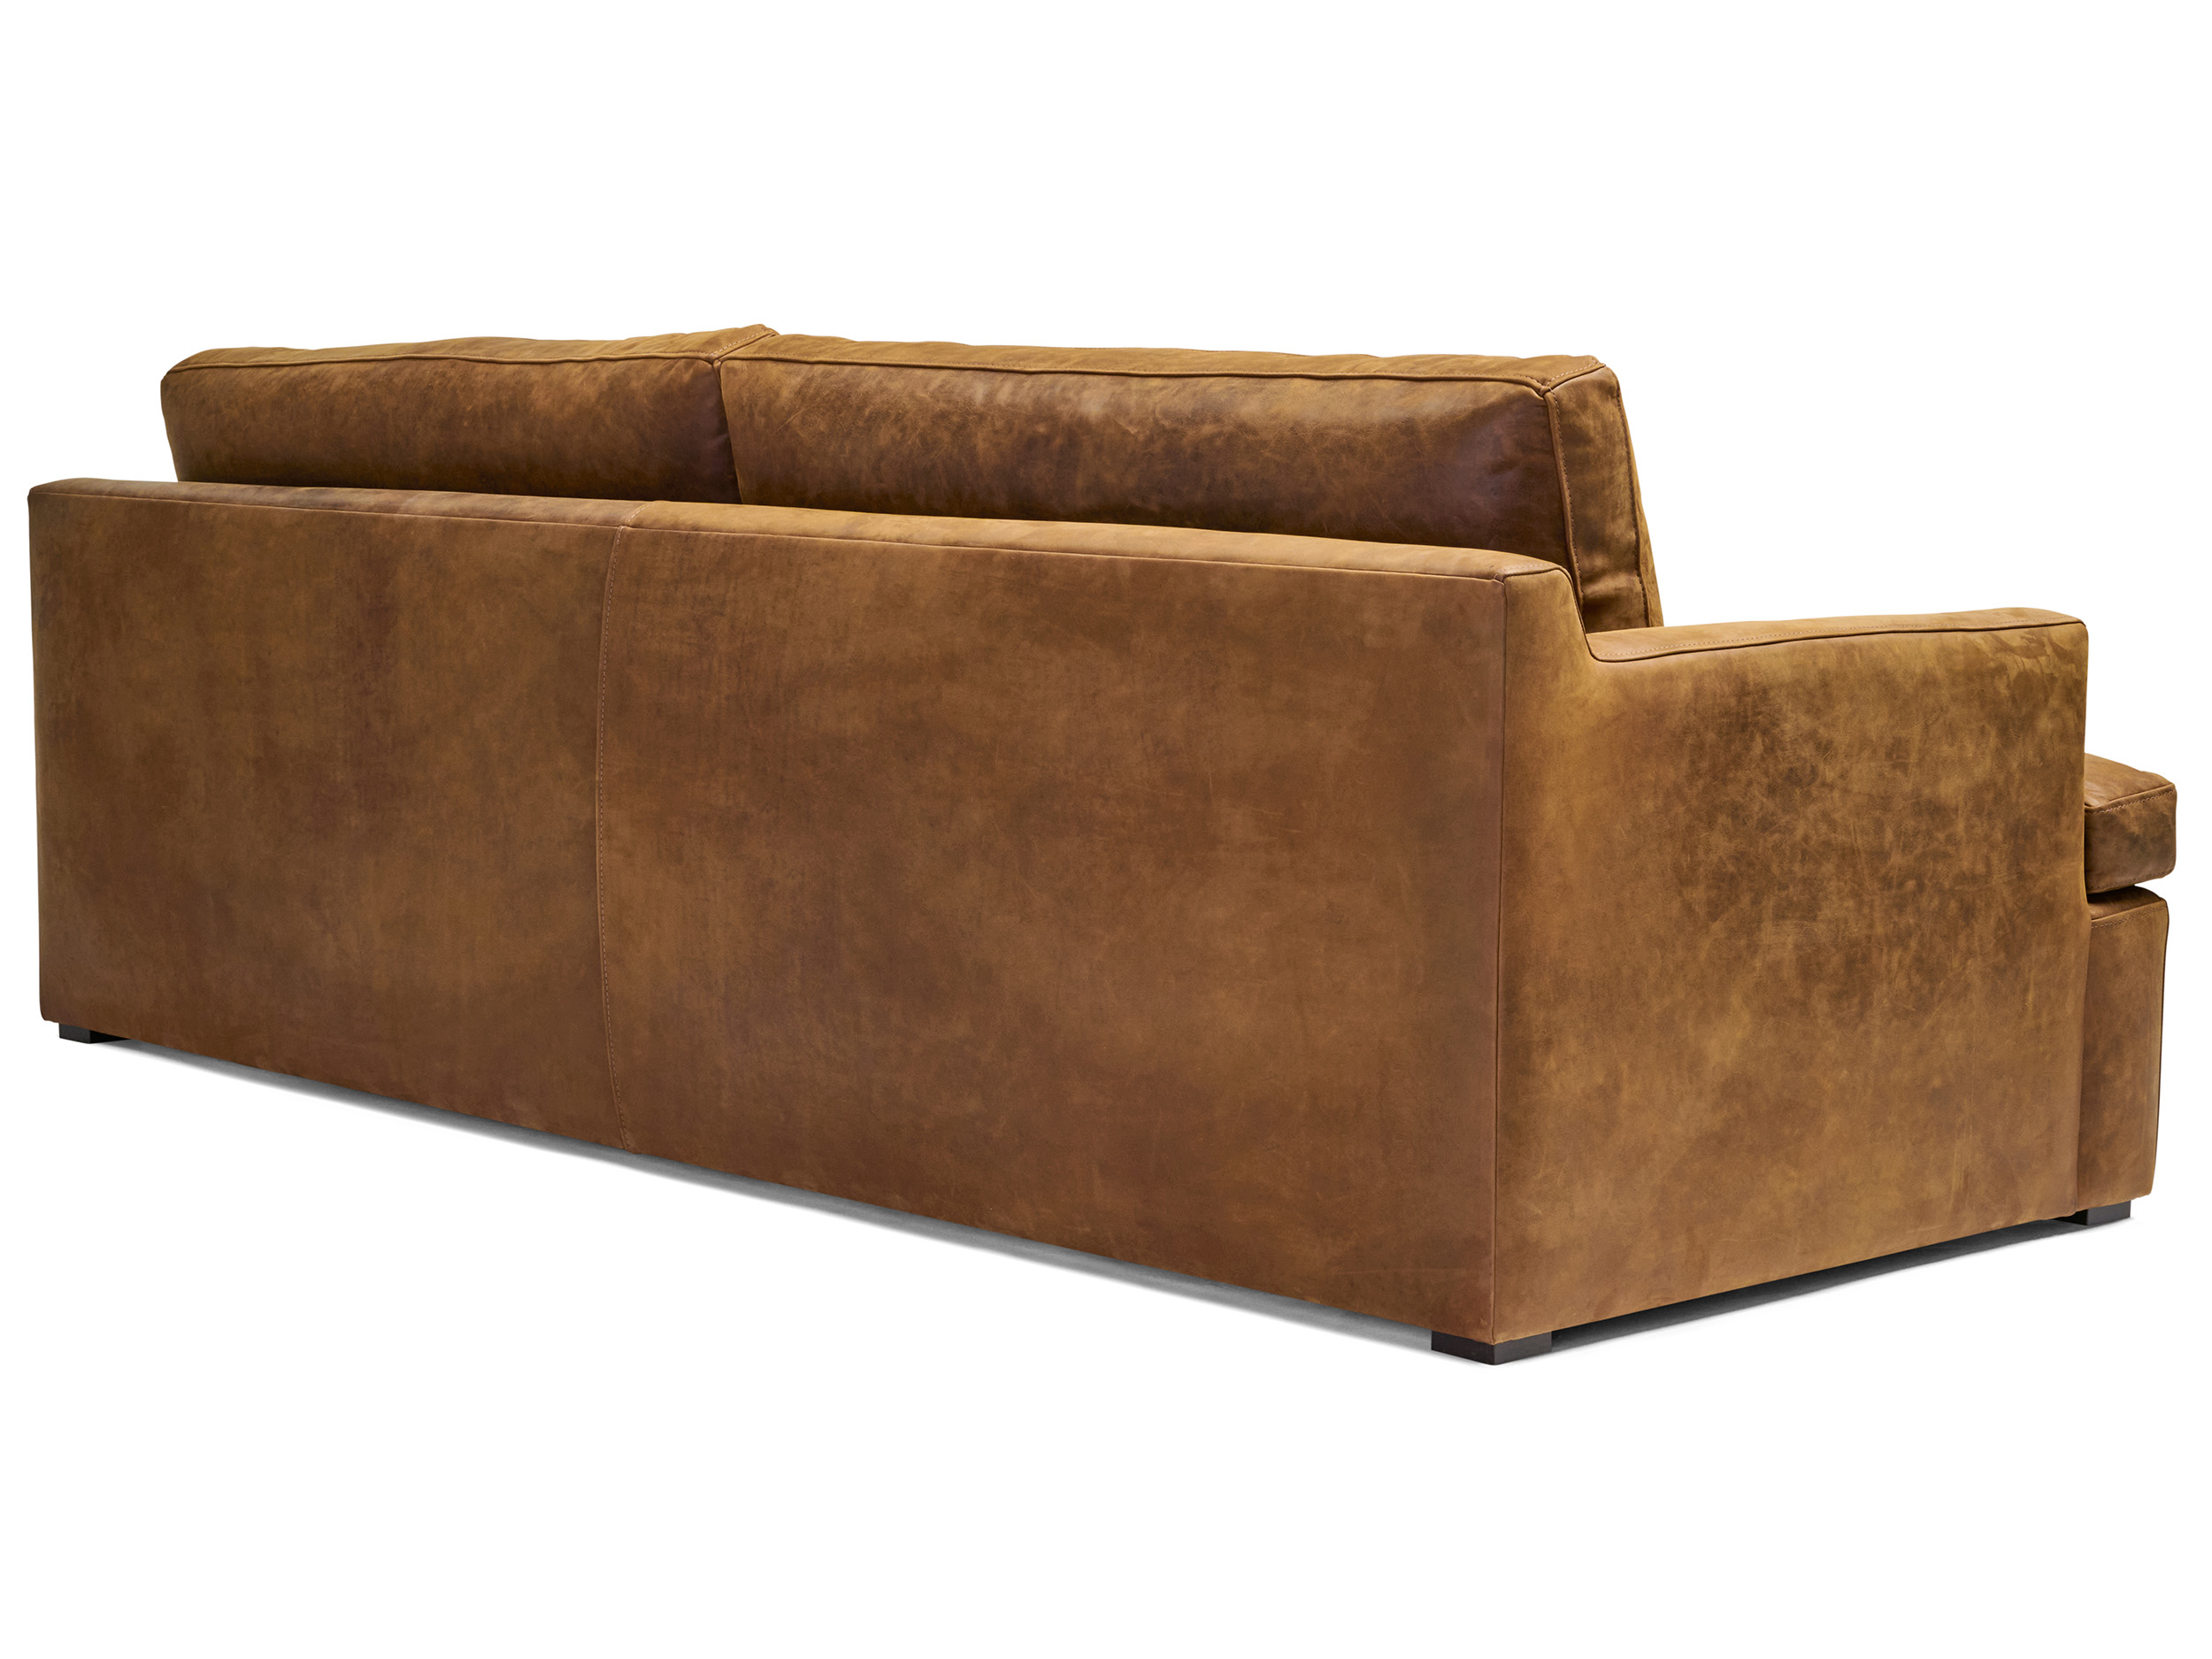 In Stock 96 x 40 Muir Track Arm Leather Sofa in Full Aniline Burnham Sycamore Nubuck Leather - rear angle